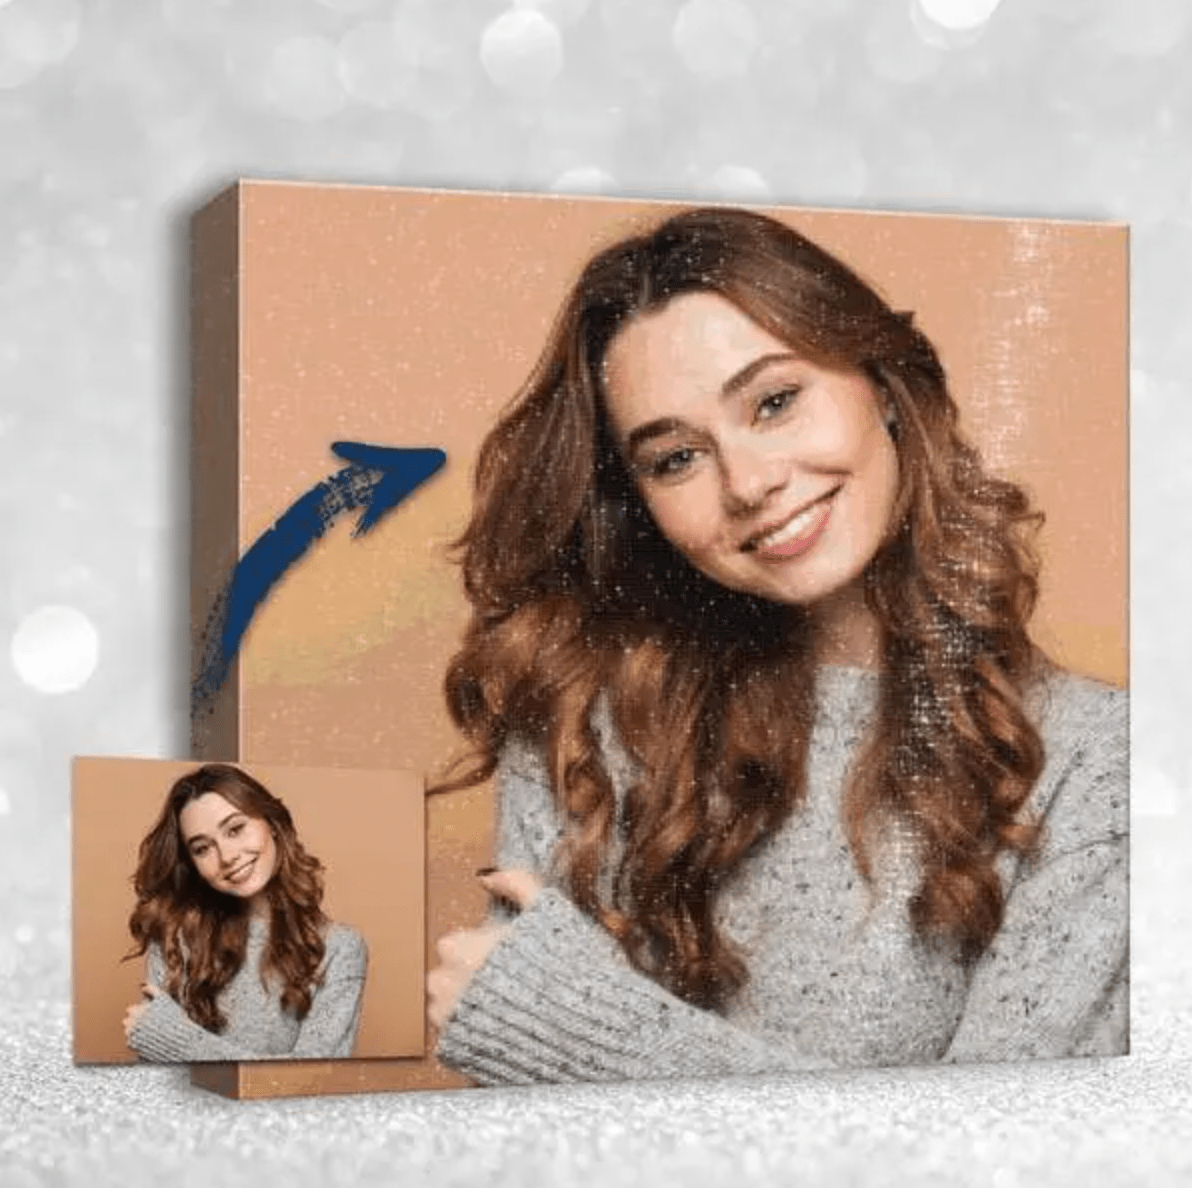 Custom Diamond Painting Kit With Your Own Photo – Just Paint with Diamonds